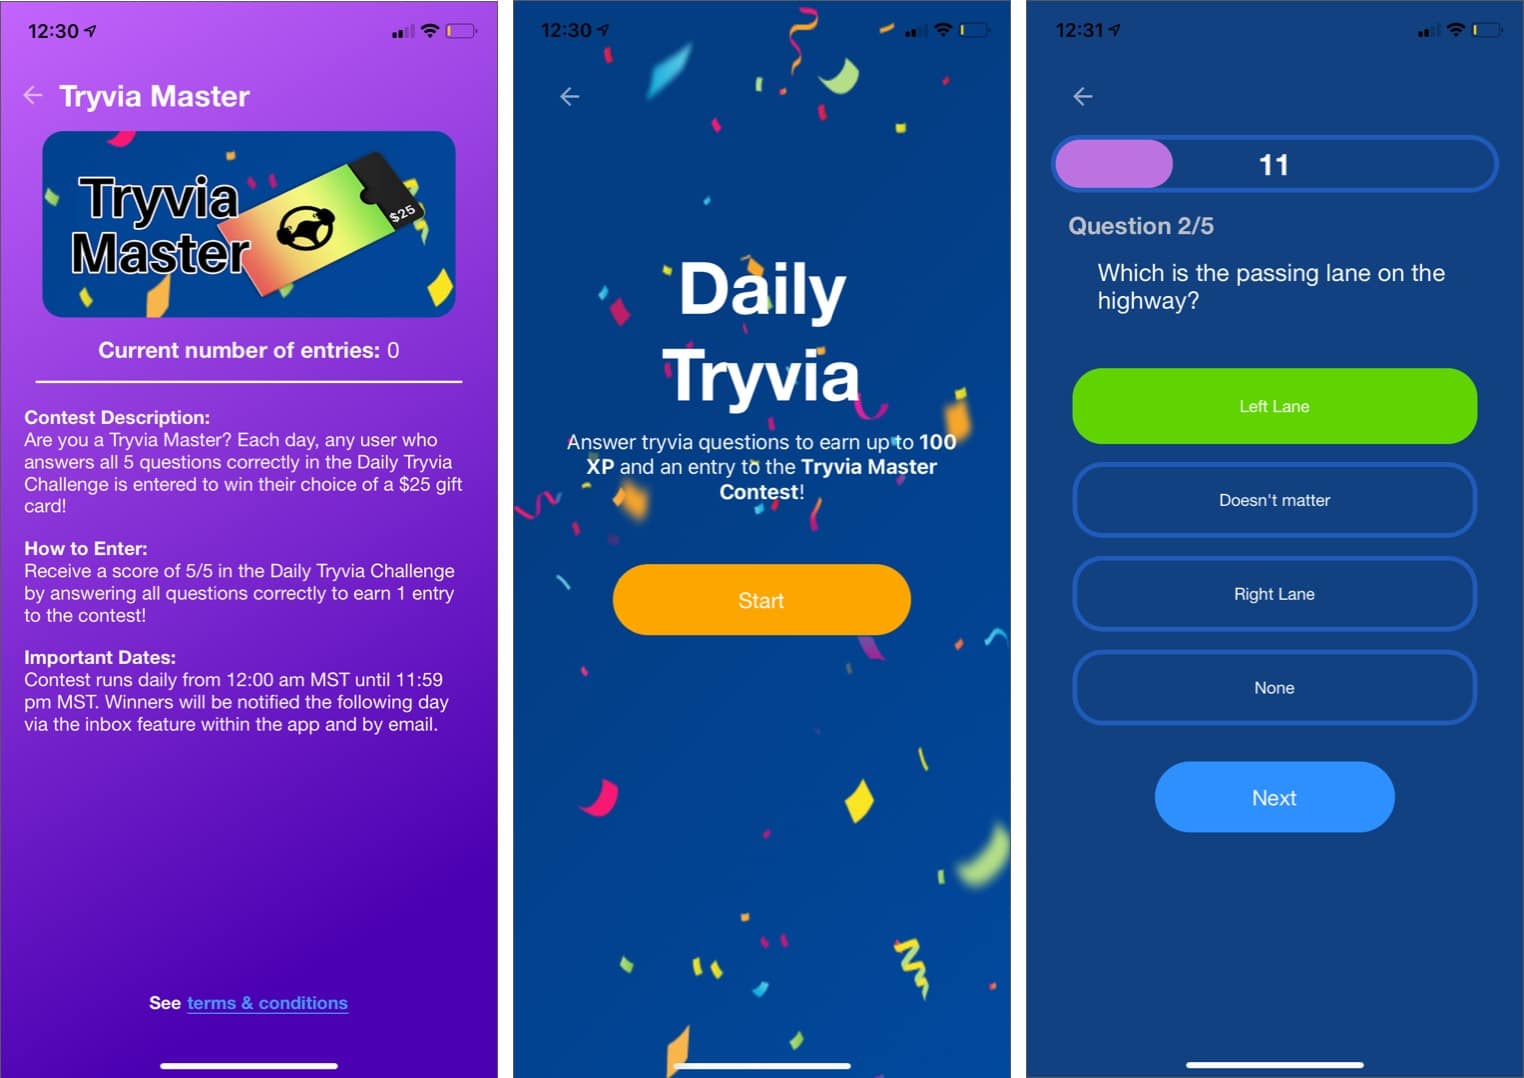 Earn extra xp by completing Daily Tryvia